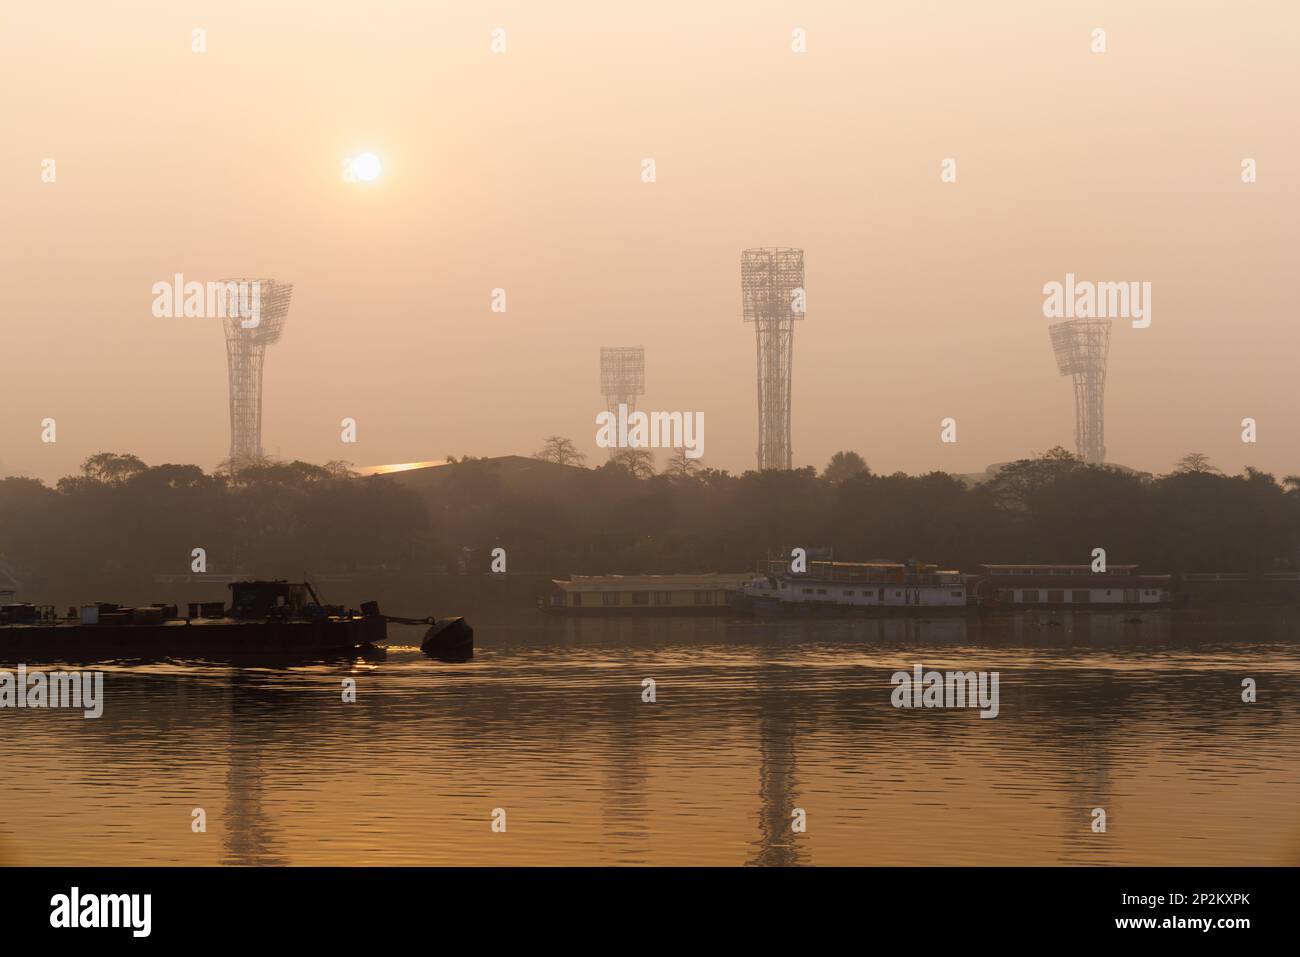 Sun rising in the smoggy atmosphere over the Hooghly River by Eden Gardens cricket stadium at Kolkata (Calcutta), capital city of West Bengal, India Stock Photo